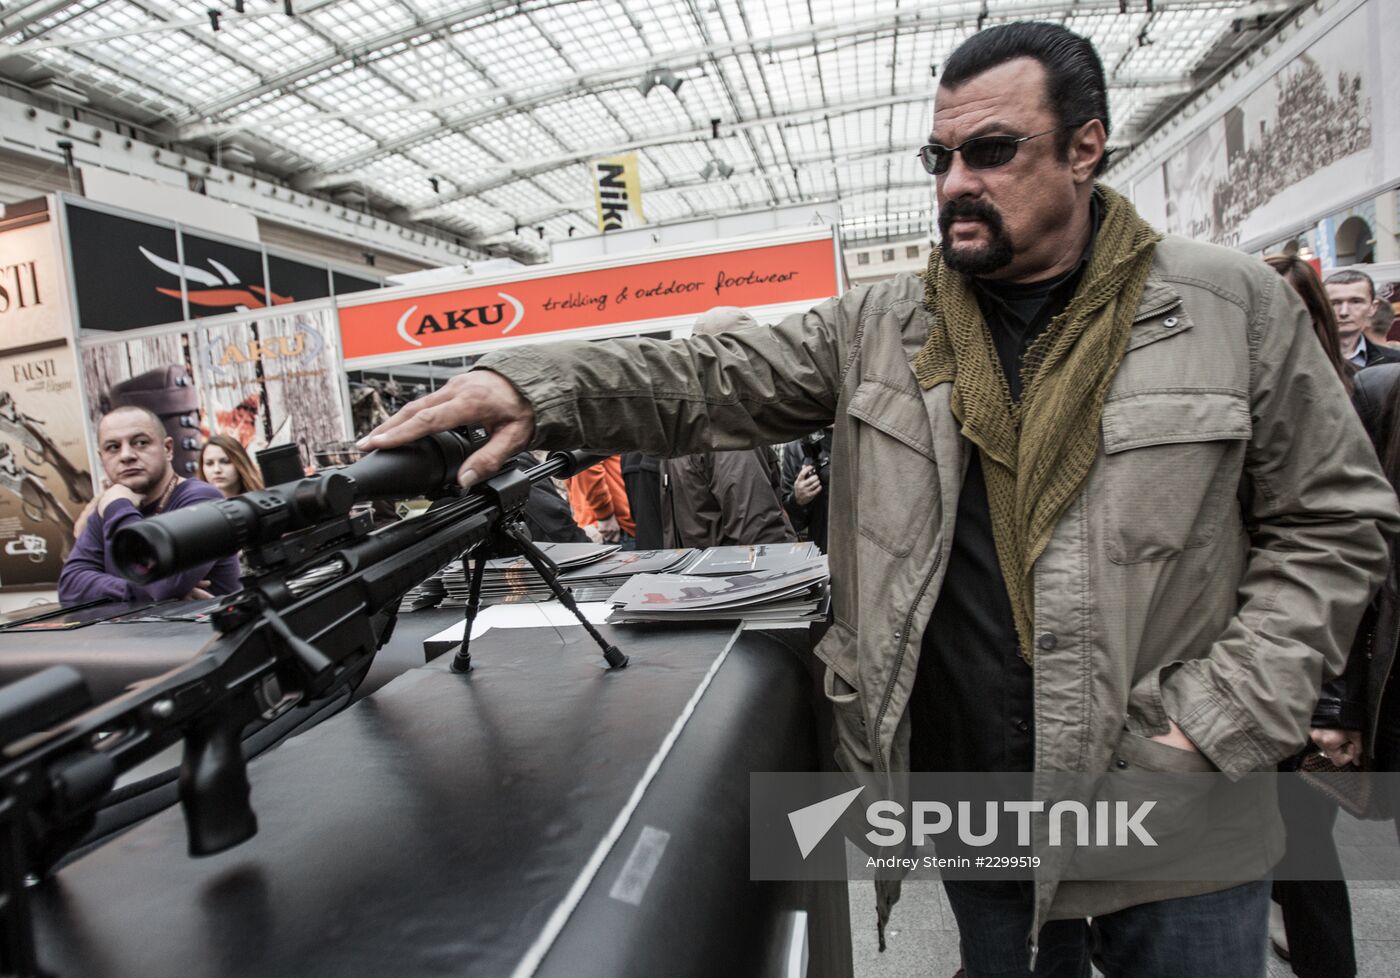 Actor Steven Seagal at Arms and Hunting Exhibition in Moscow